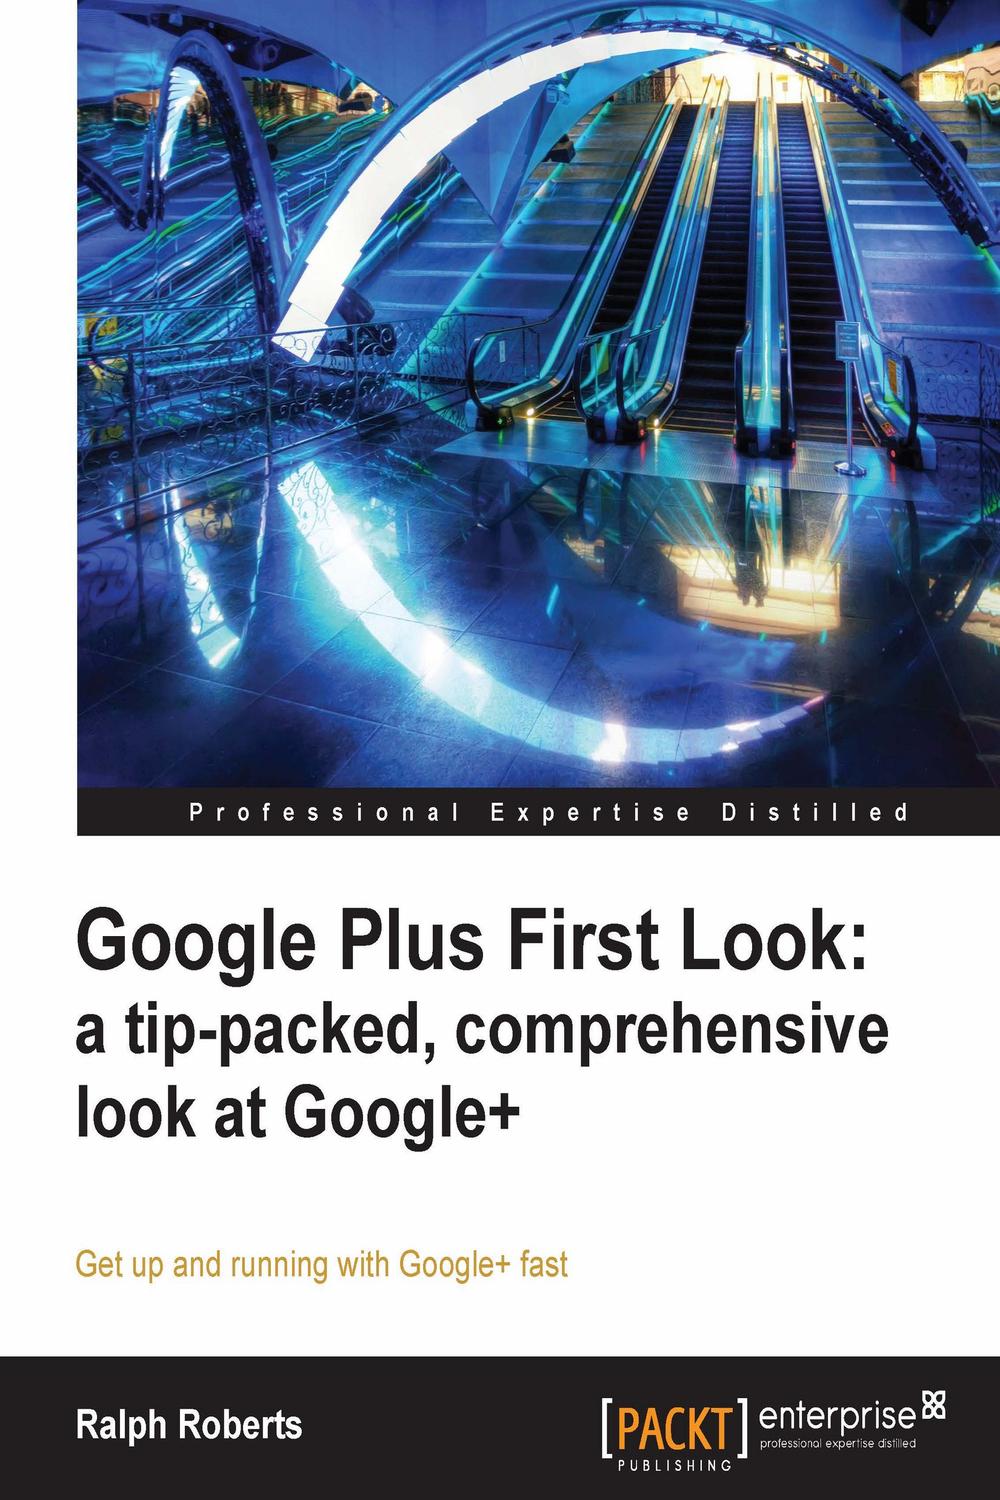 Google Plus First Look: a tip-packed, comprehensive look at Google+ - Ralph Roberts